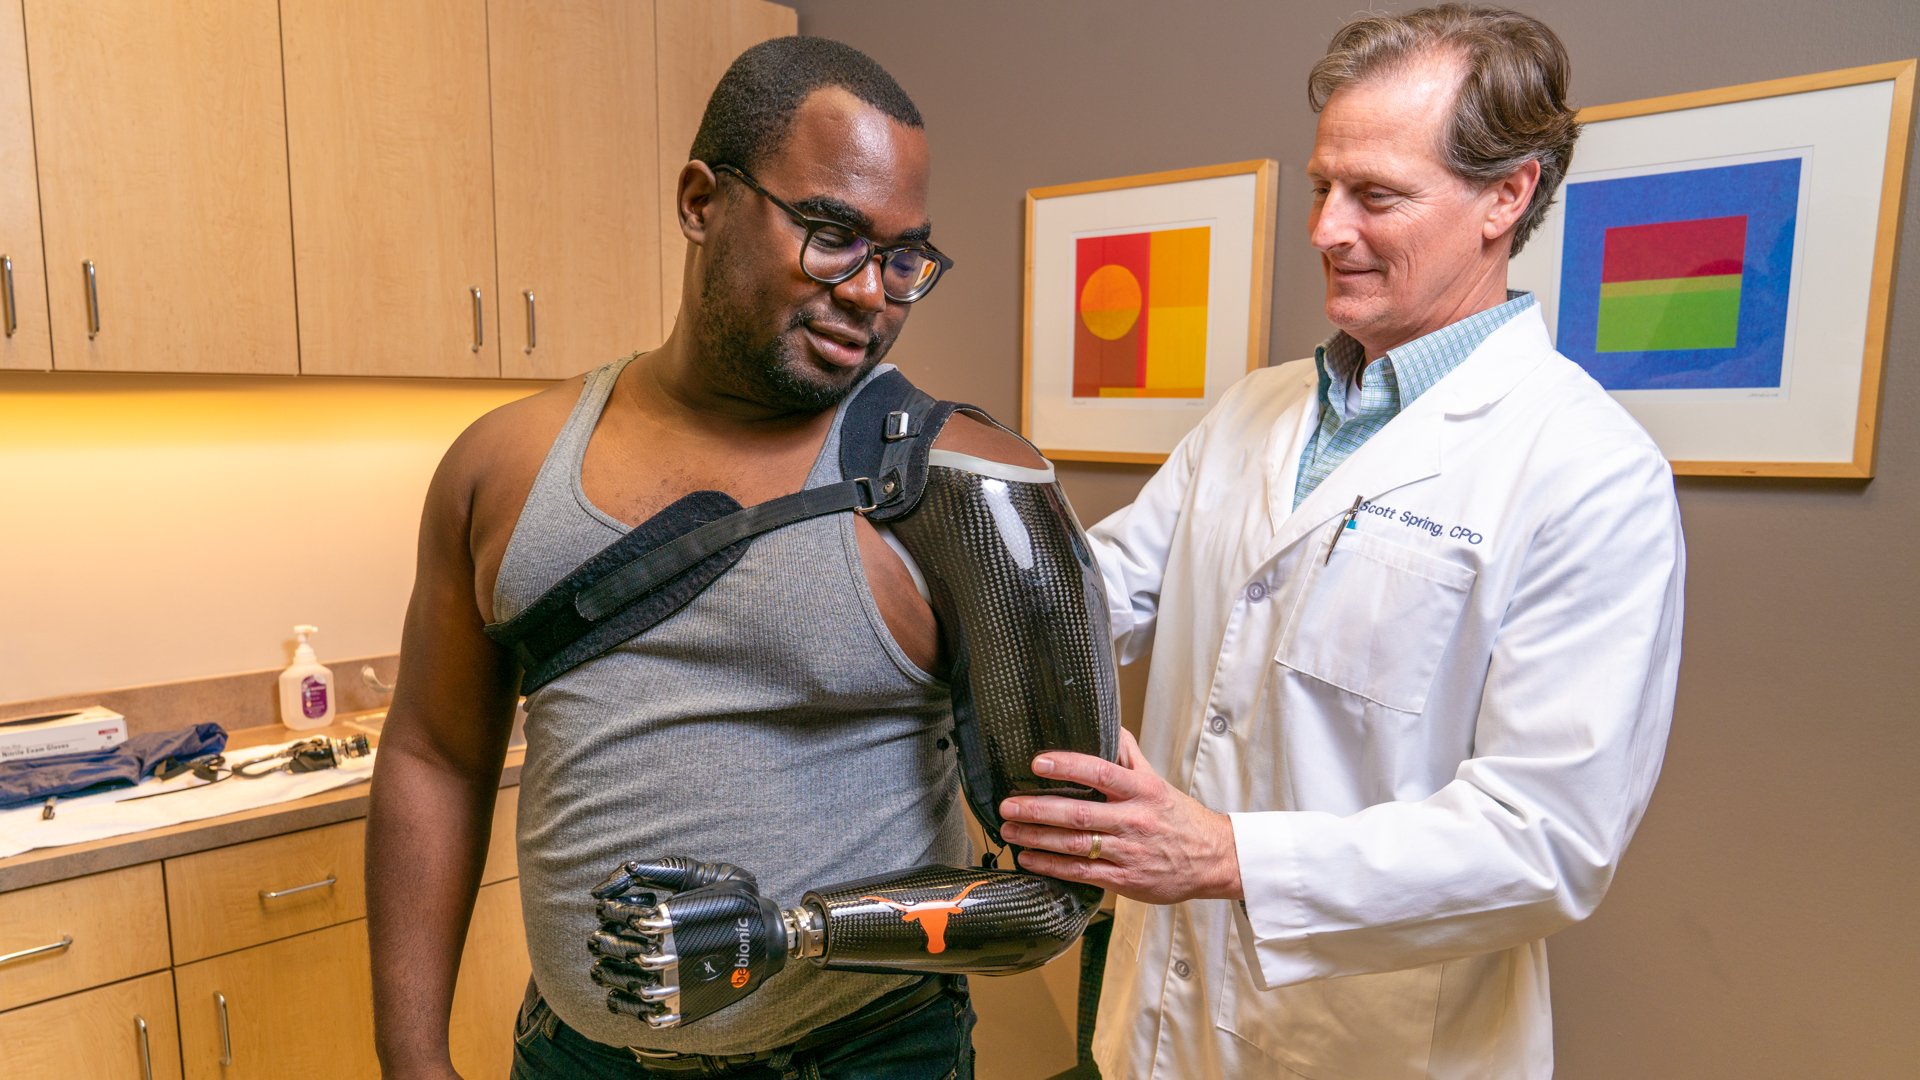 Custom electrically-powered prosthesis for shoulder disarticulation patient Lloyd Keith